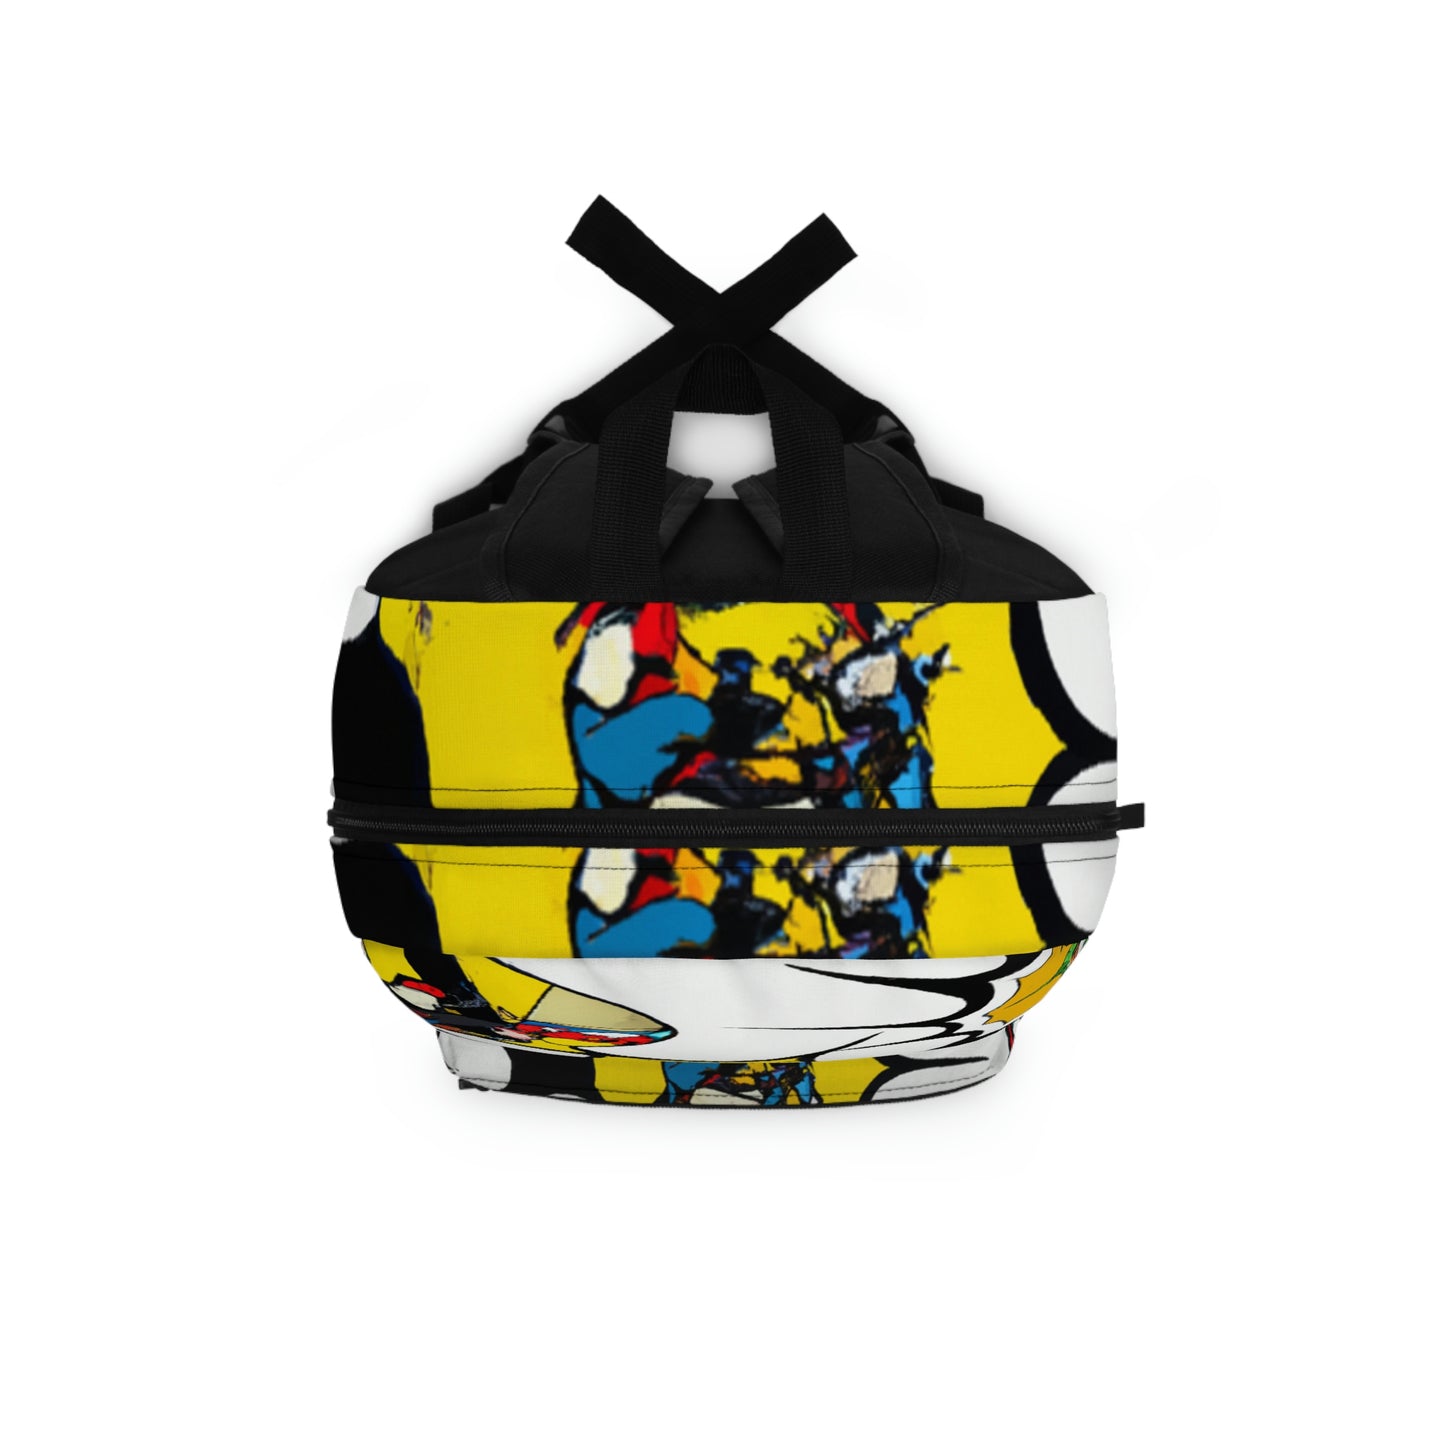 Quinzel Sparks - Comic Book Backpack 1 of 1 Collectible